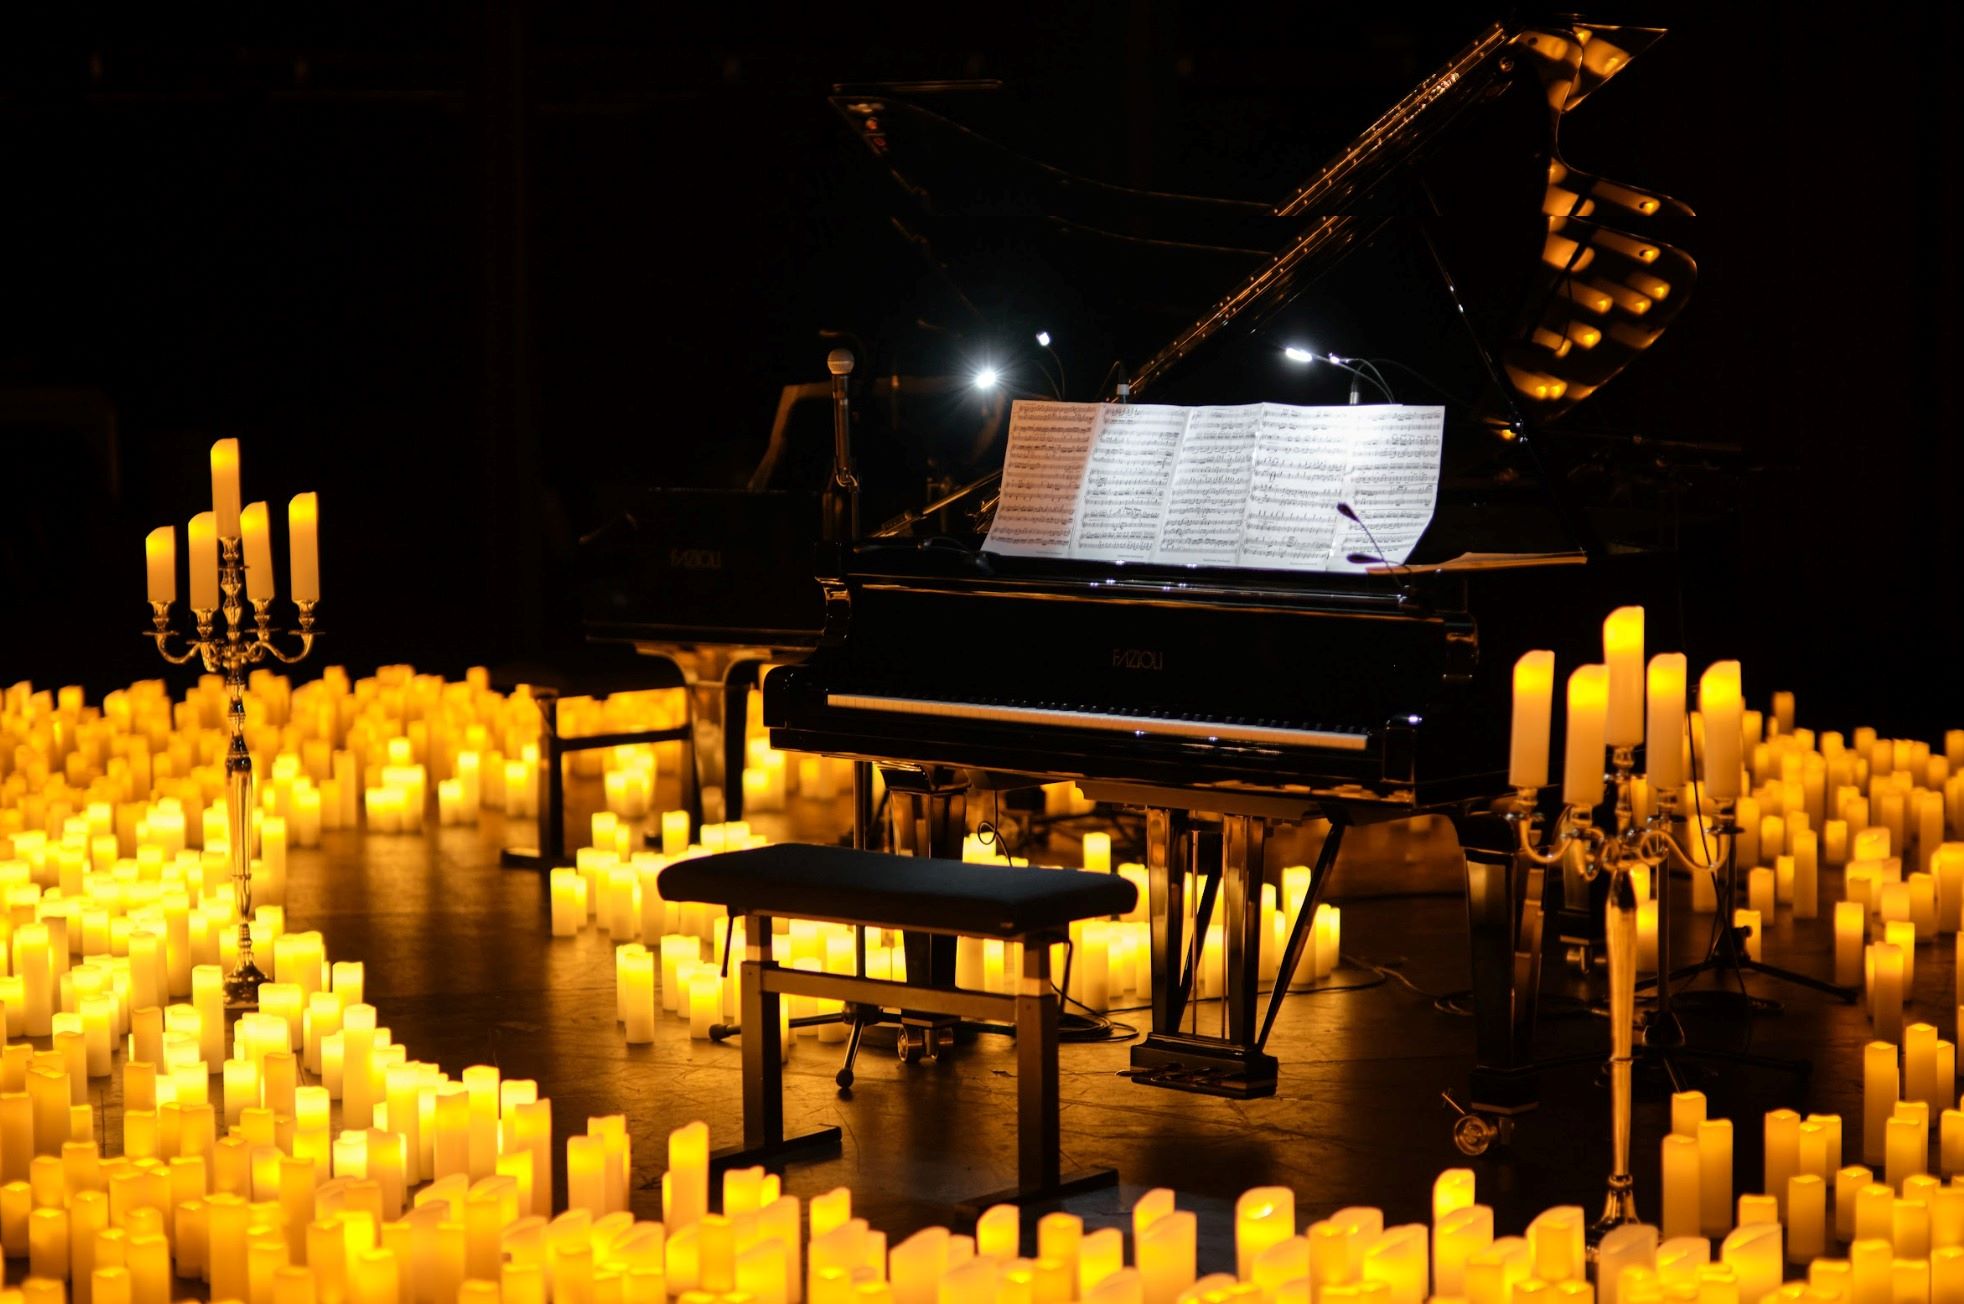 Candlelight Concert - Coldplay Ludovico Einaudi culture abu dhabi music